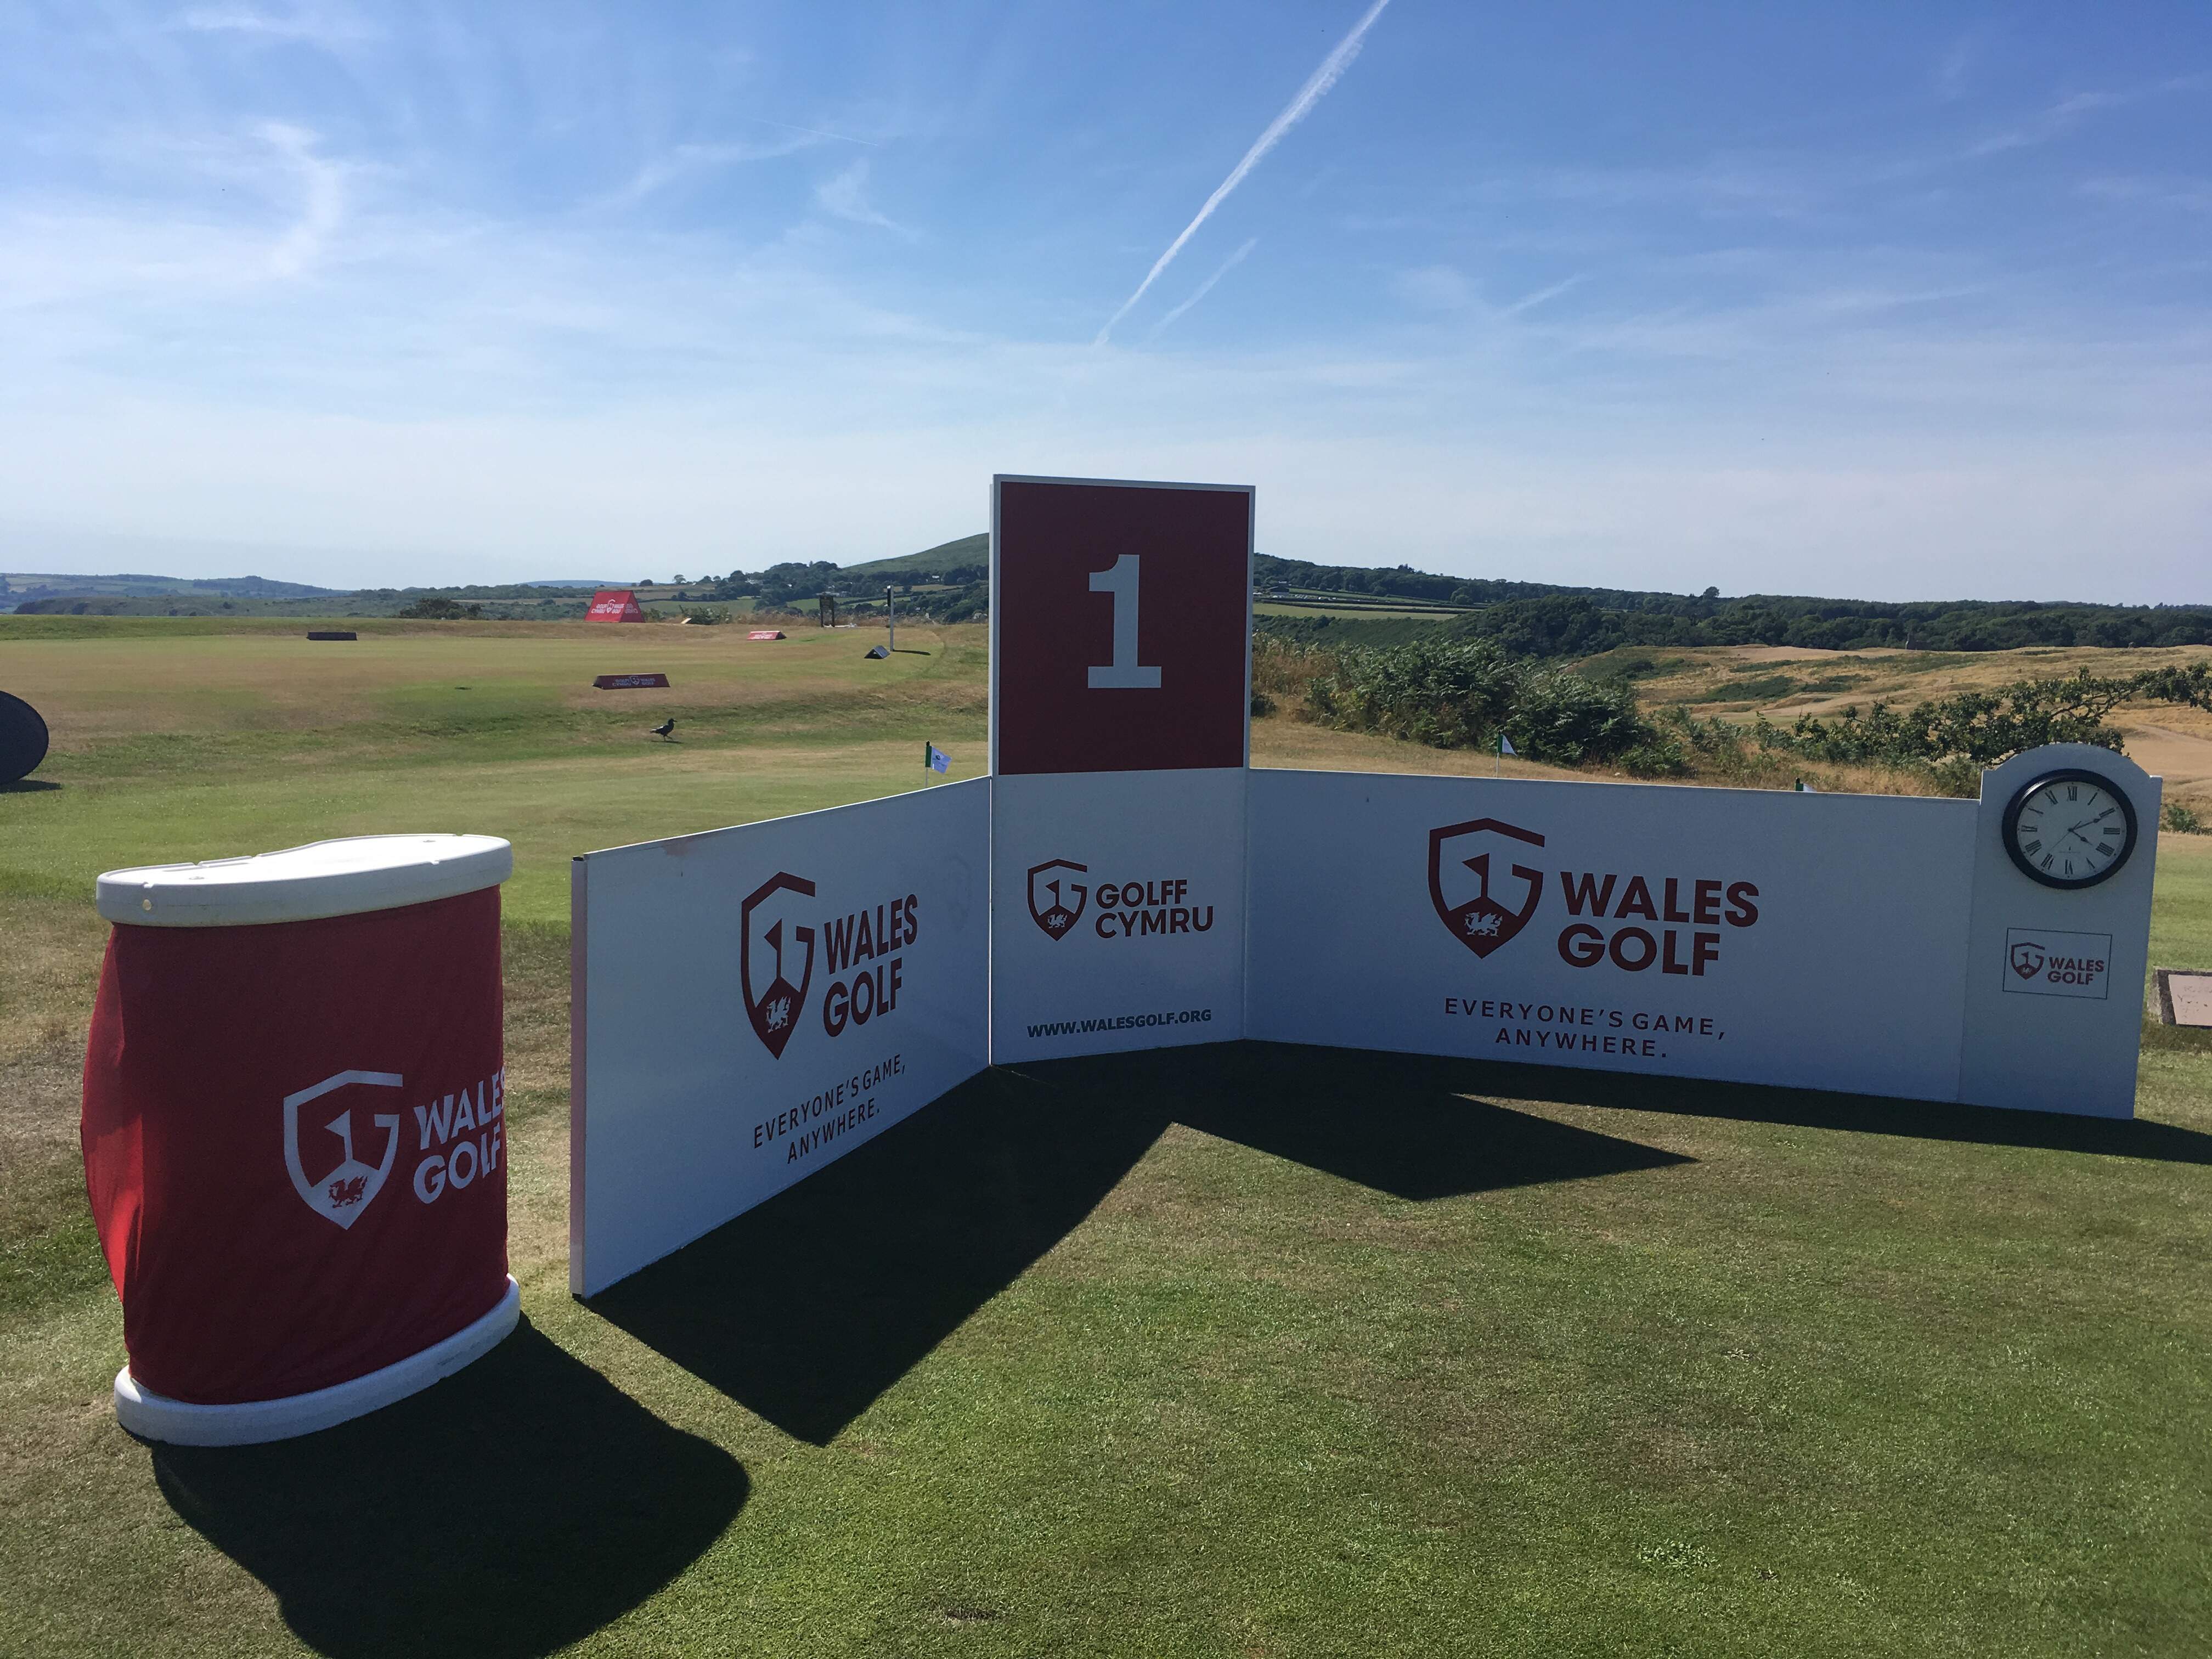 Golf, signage, on-course, tee, branding, sponsors, Wales, Golf, Championship